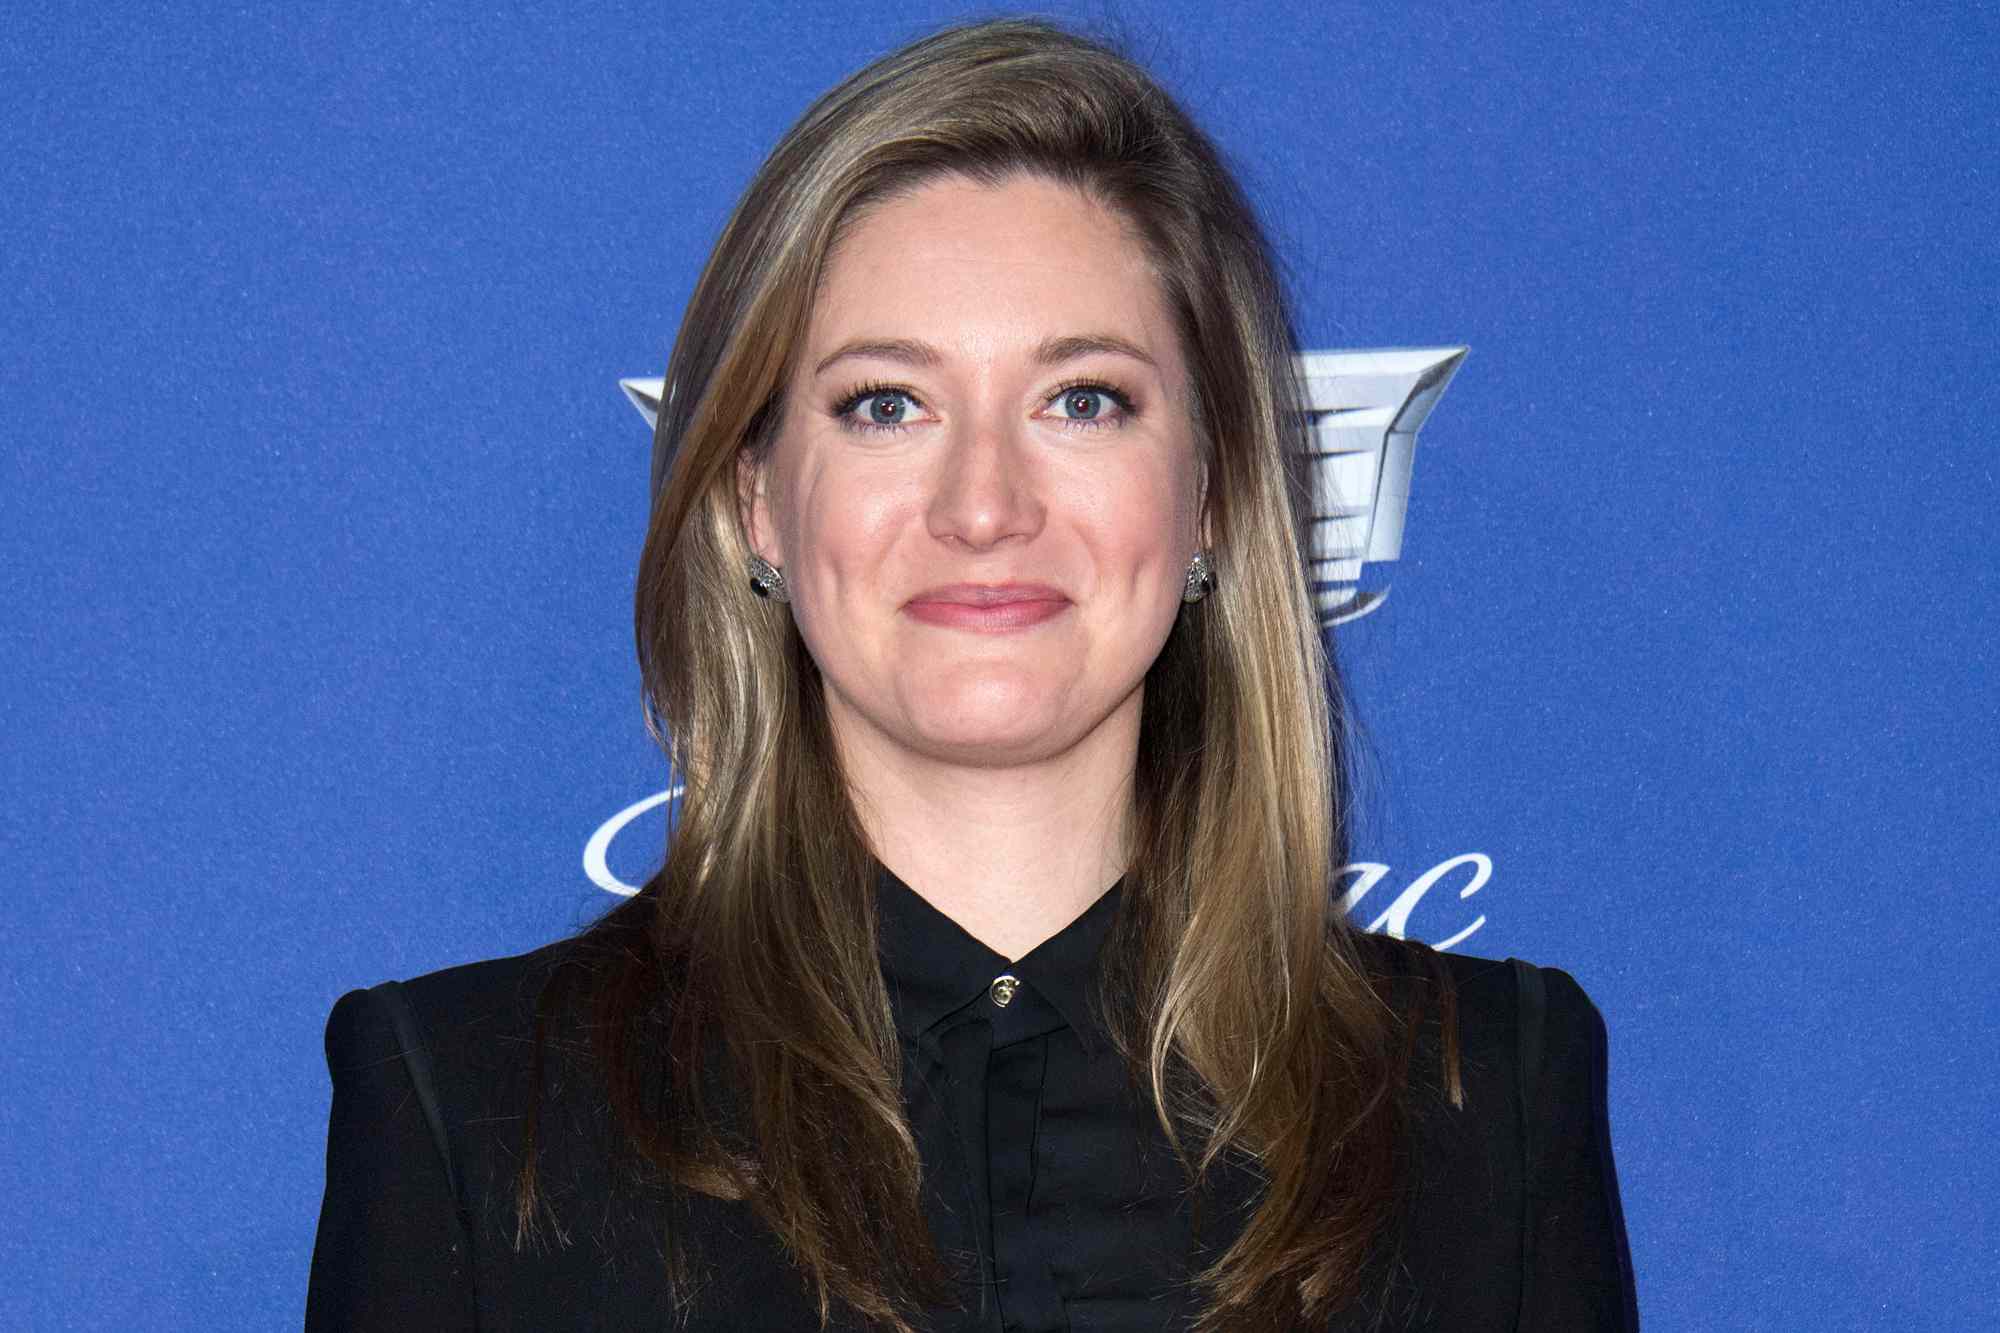 “Young Sheldon”'s Zoe Perry 'Teared Up' After Reading Shocking Scene as Series Nears End